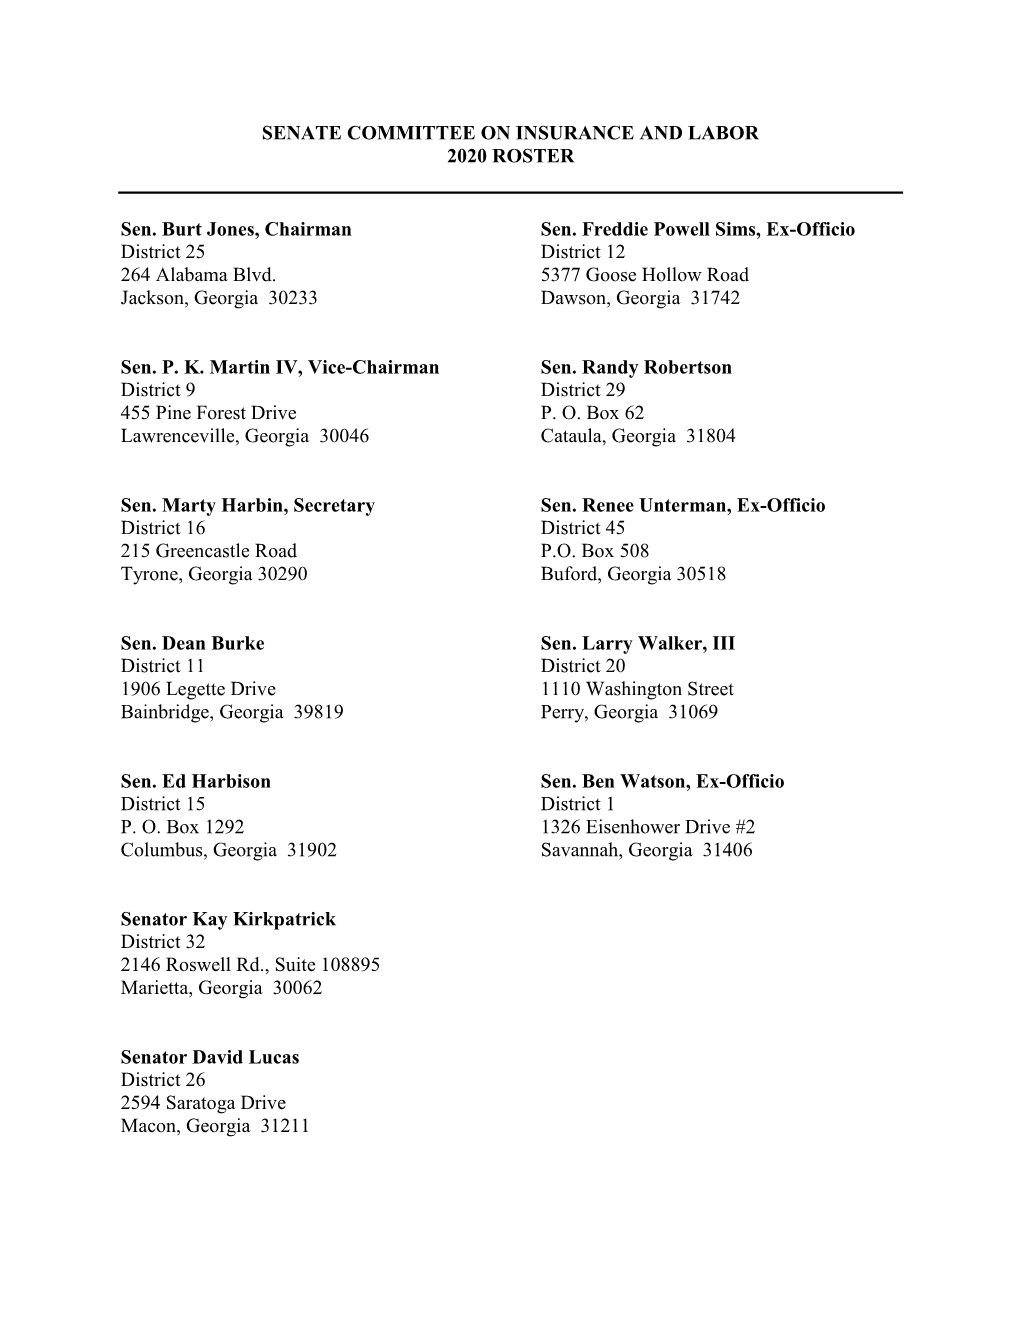 Senate Committee on Insurance and Labor 2020 Roster